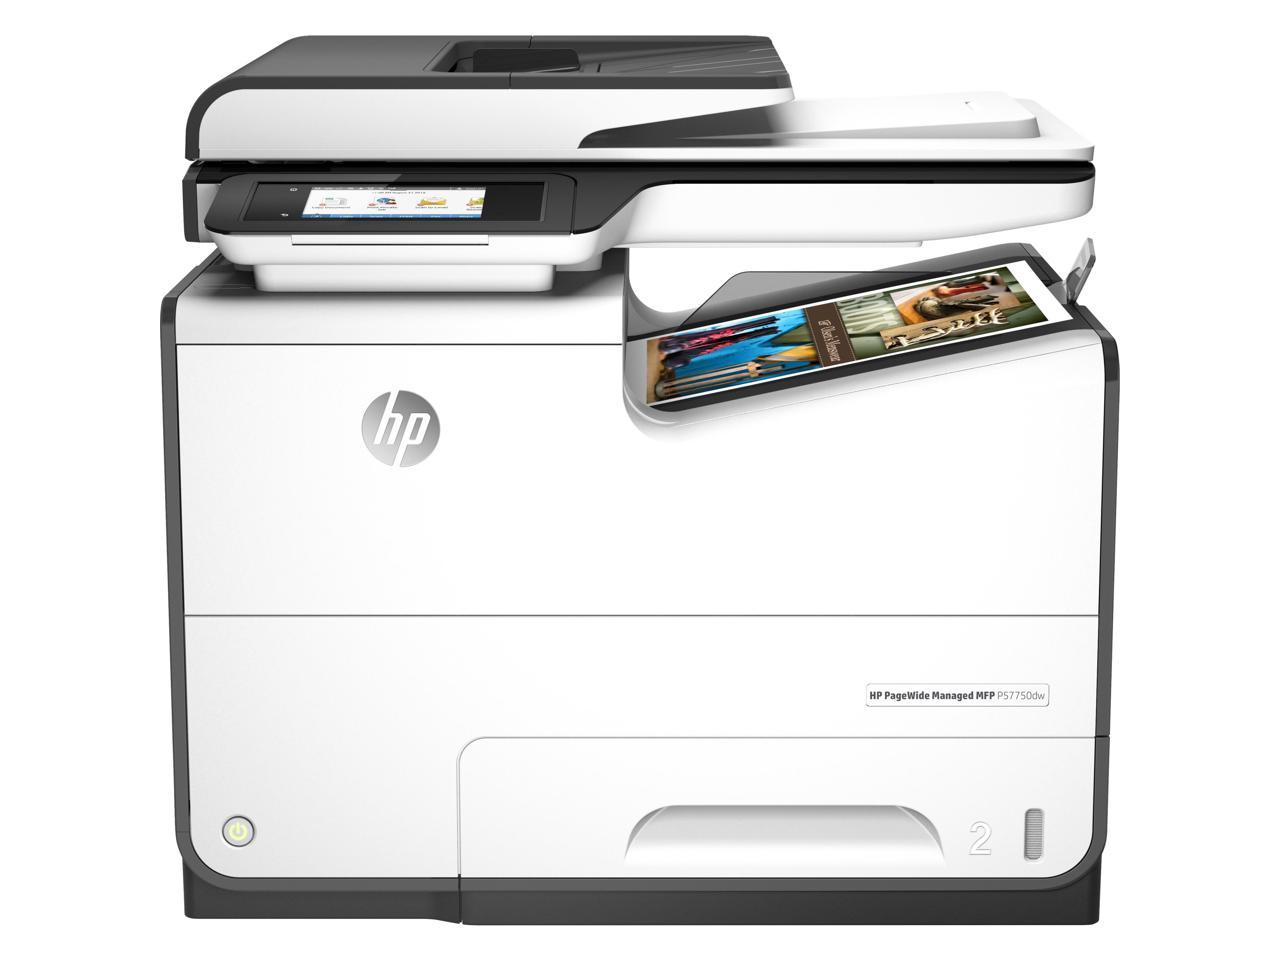 Looking For HP PageWide Managed P57750dw Multifunction Printer | Copy, Scan, Fax, Print With 75 PPM Printing Speed For Office Use